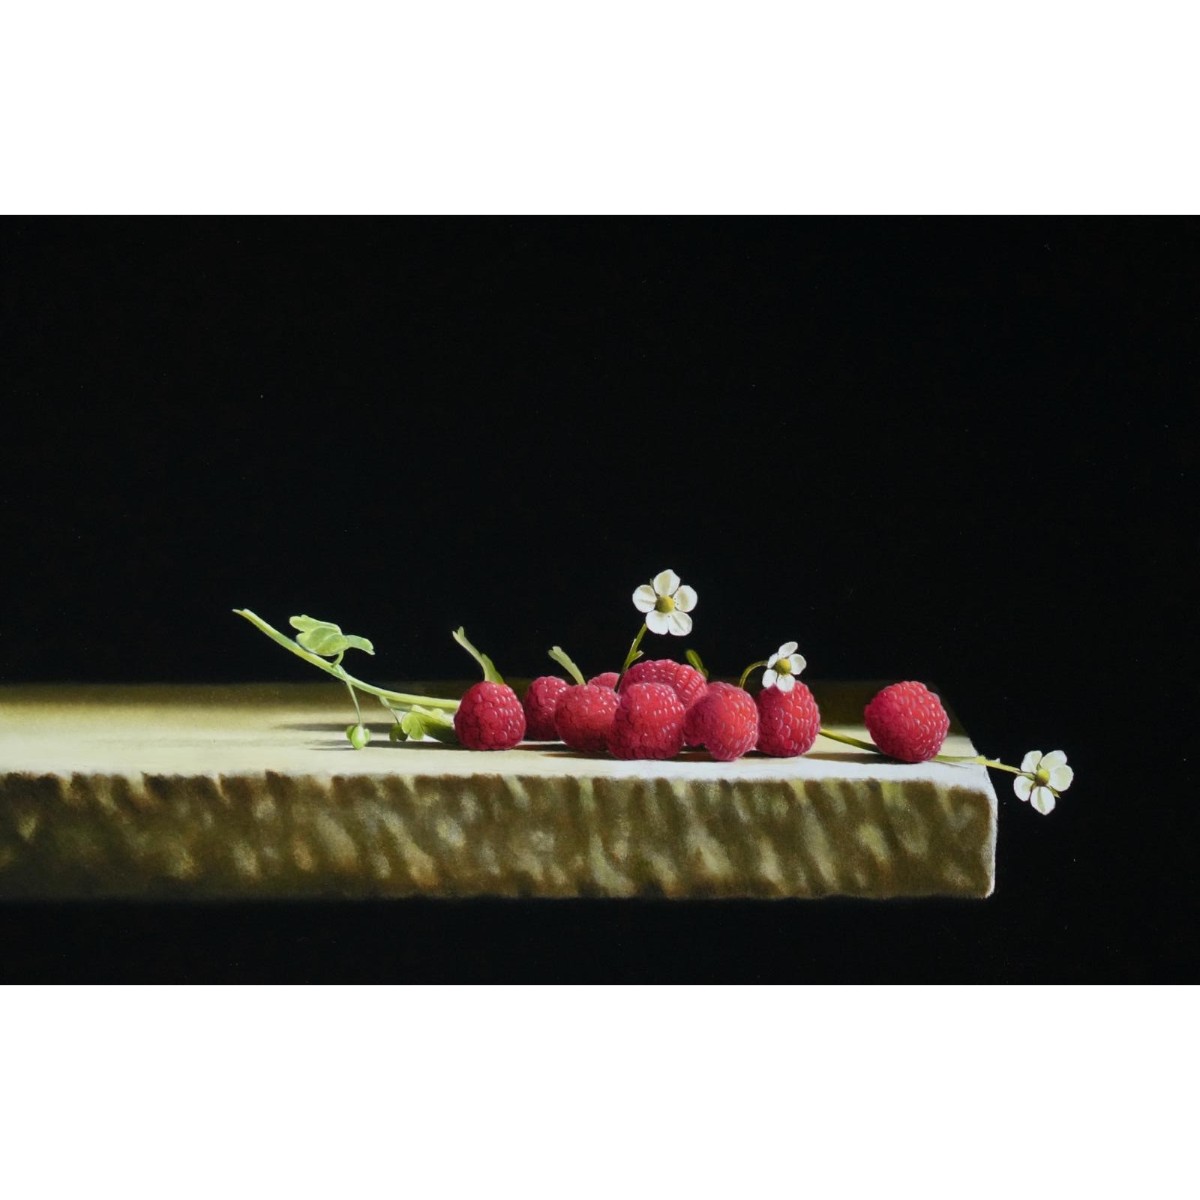 LES FRAMBOISES - PIERRE-YVES RUSSO - Galeries Bartoux